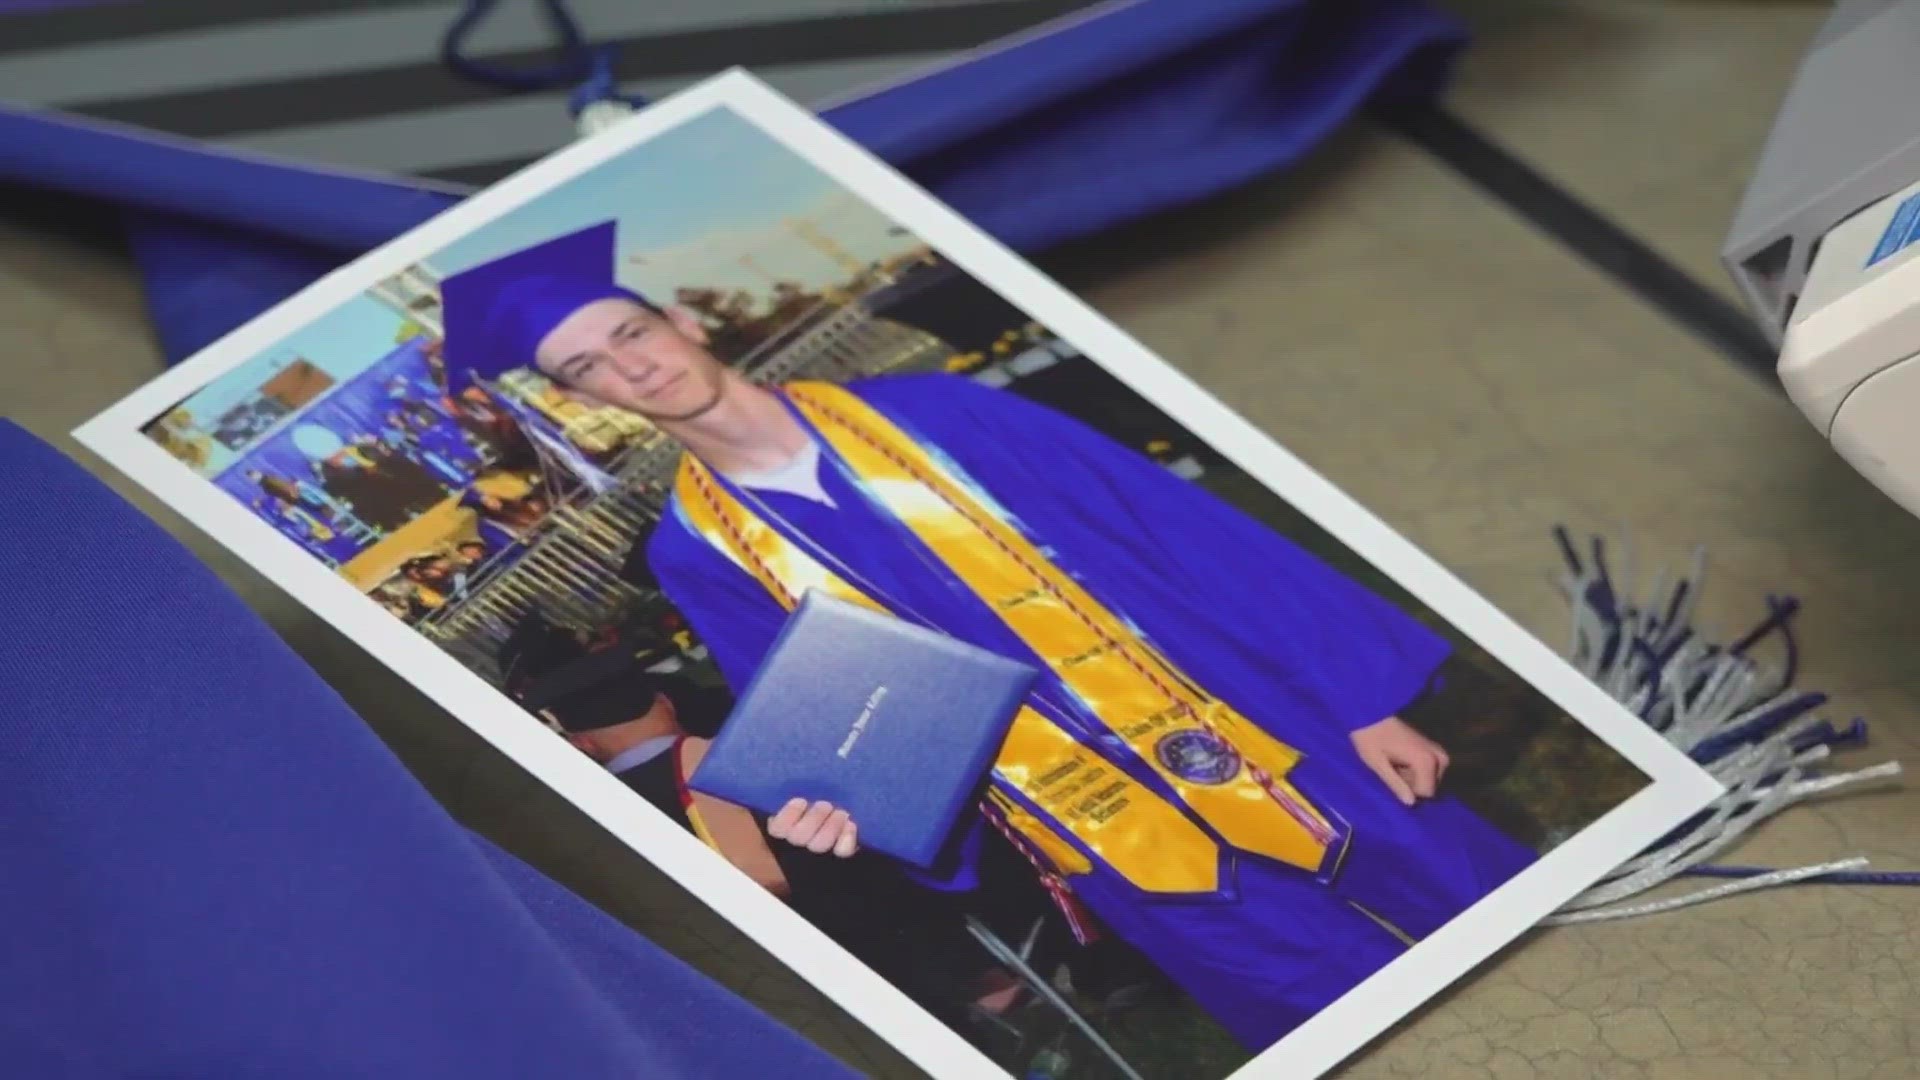 When the Turlock High School senior Hayden Elliott crosses the stage again on June 2, this time he will be getting a high school diploma.